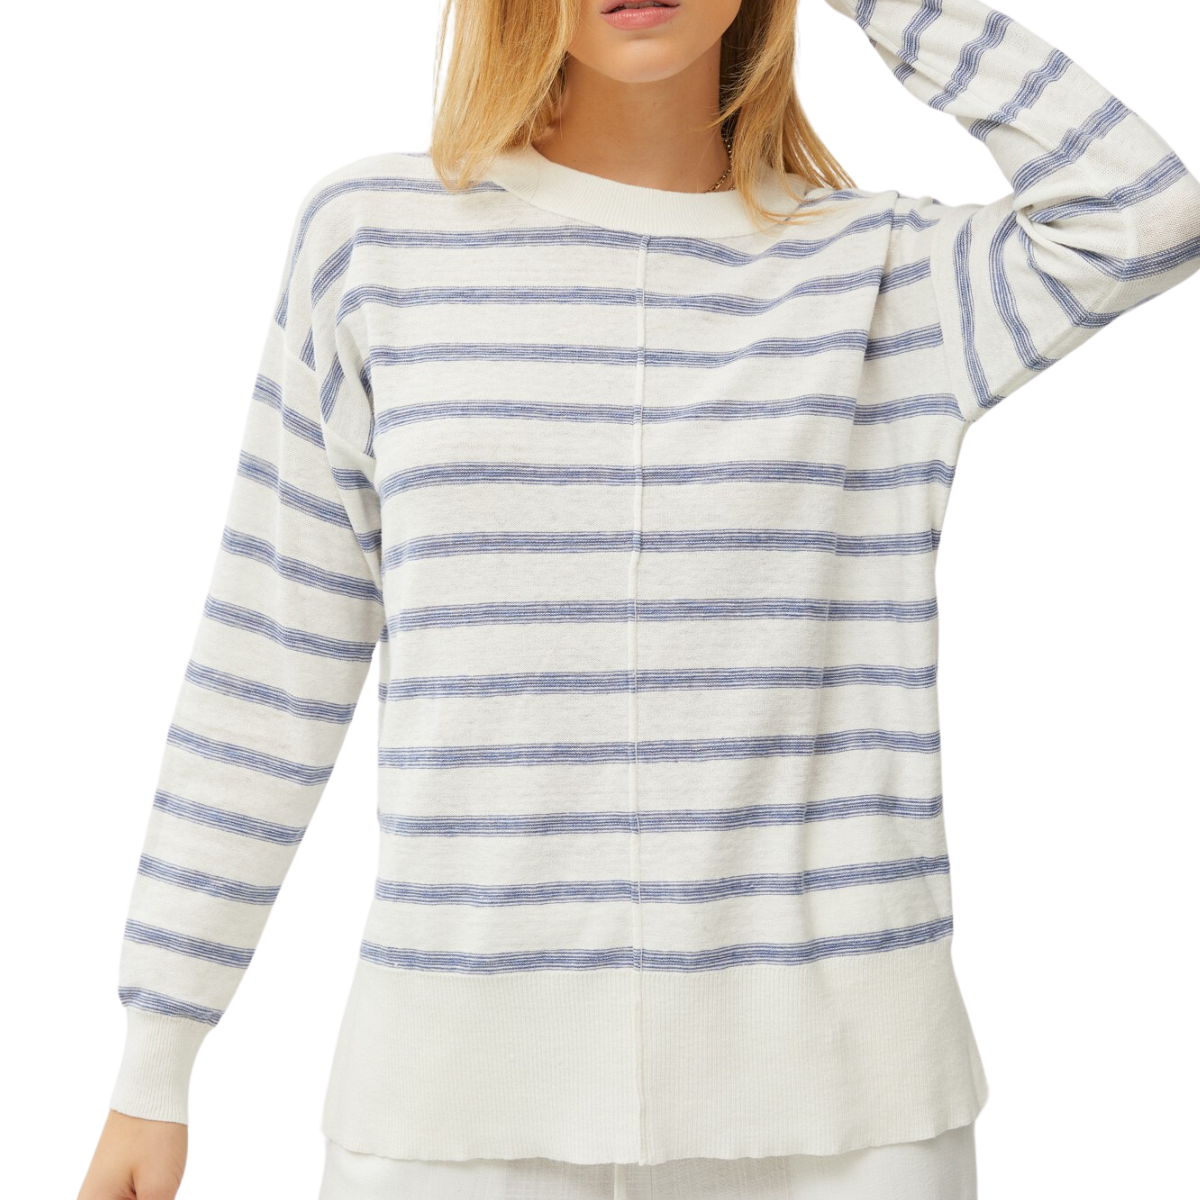 A woman wearing a lightweight Fashiongo "Stripes It Is - Blue" sweater with long sleeves.